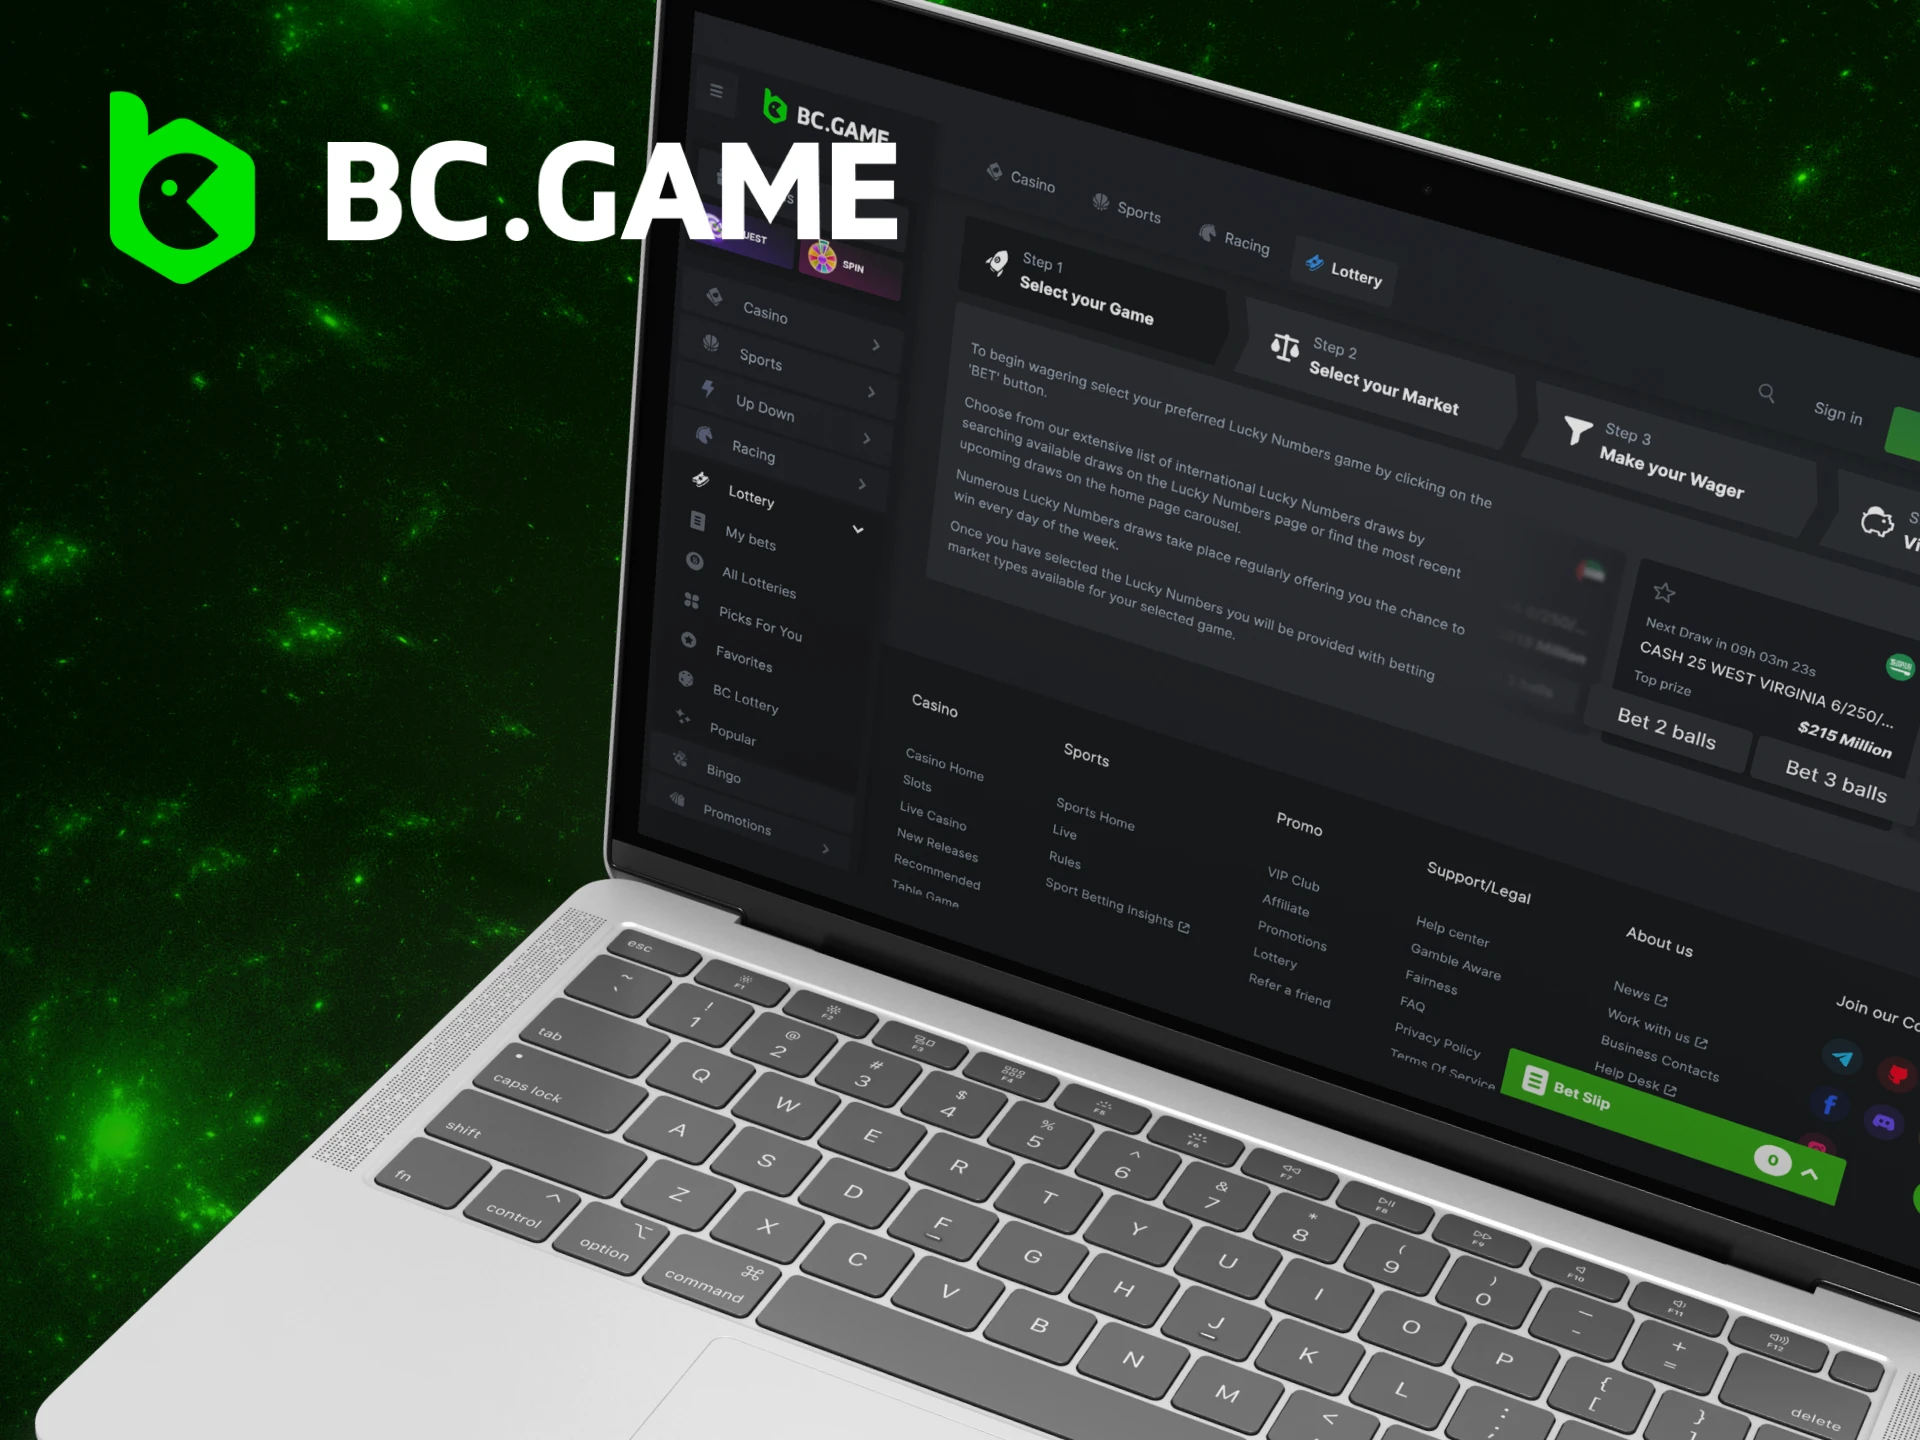 Instructions on how to start playing lotteries on the BC Game casino website.